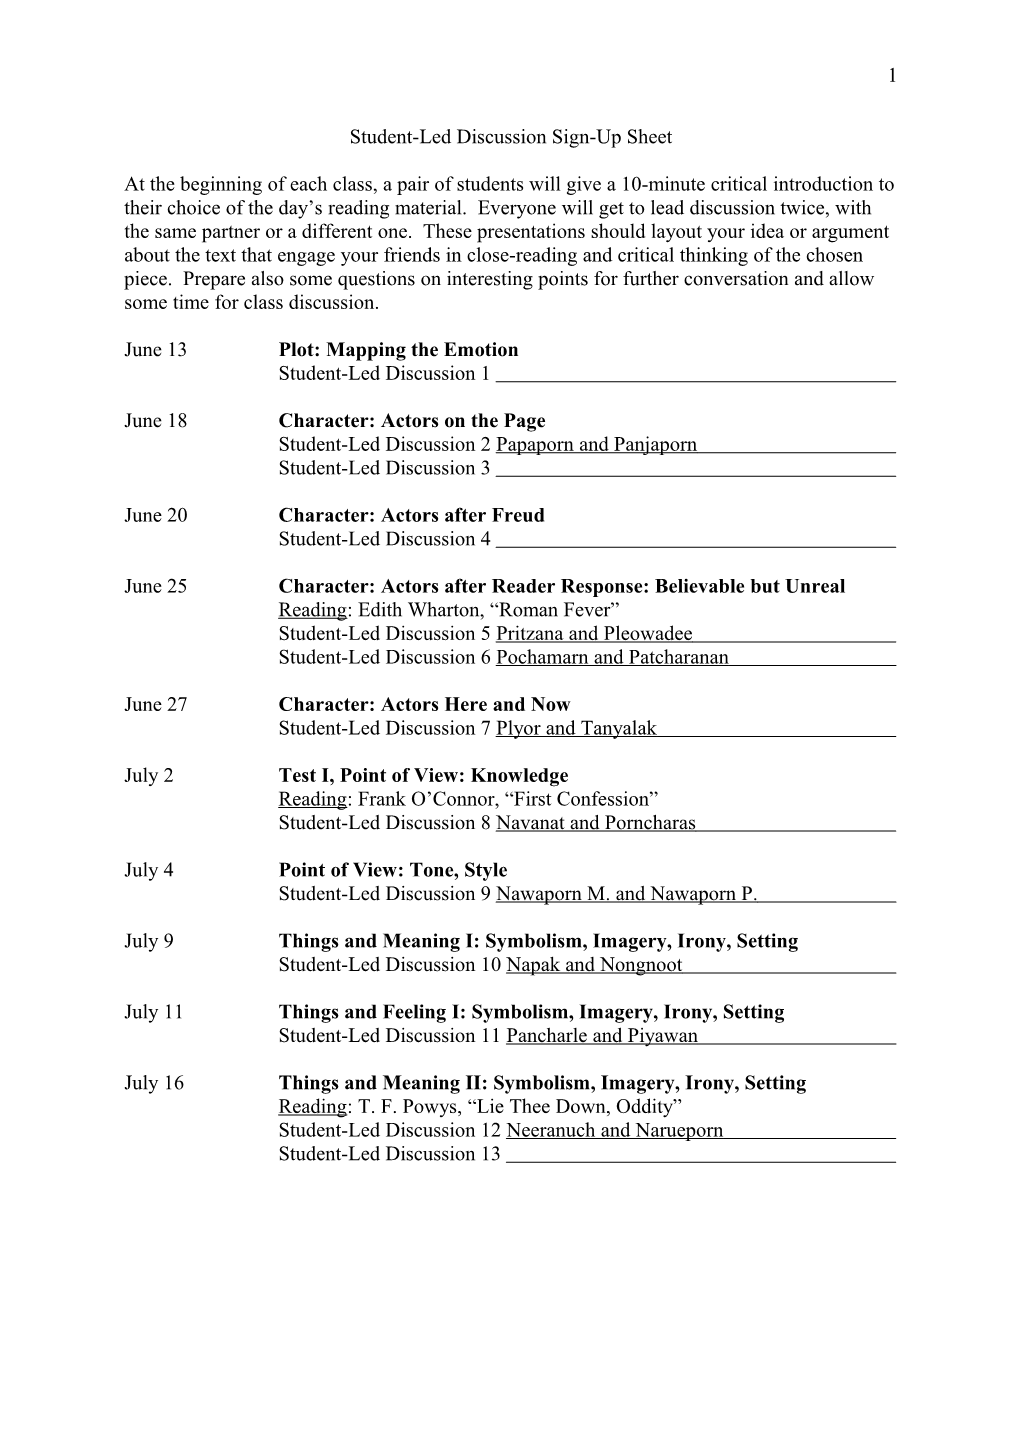 Student-Led Discussion Sign-Up Sheet